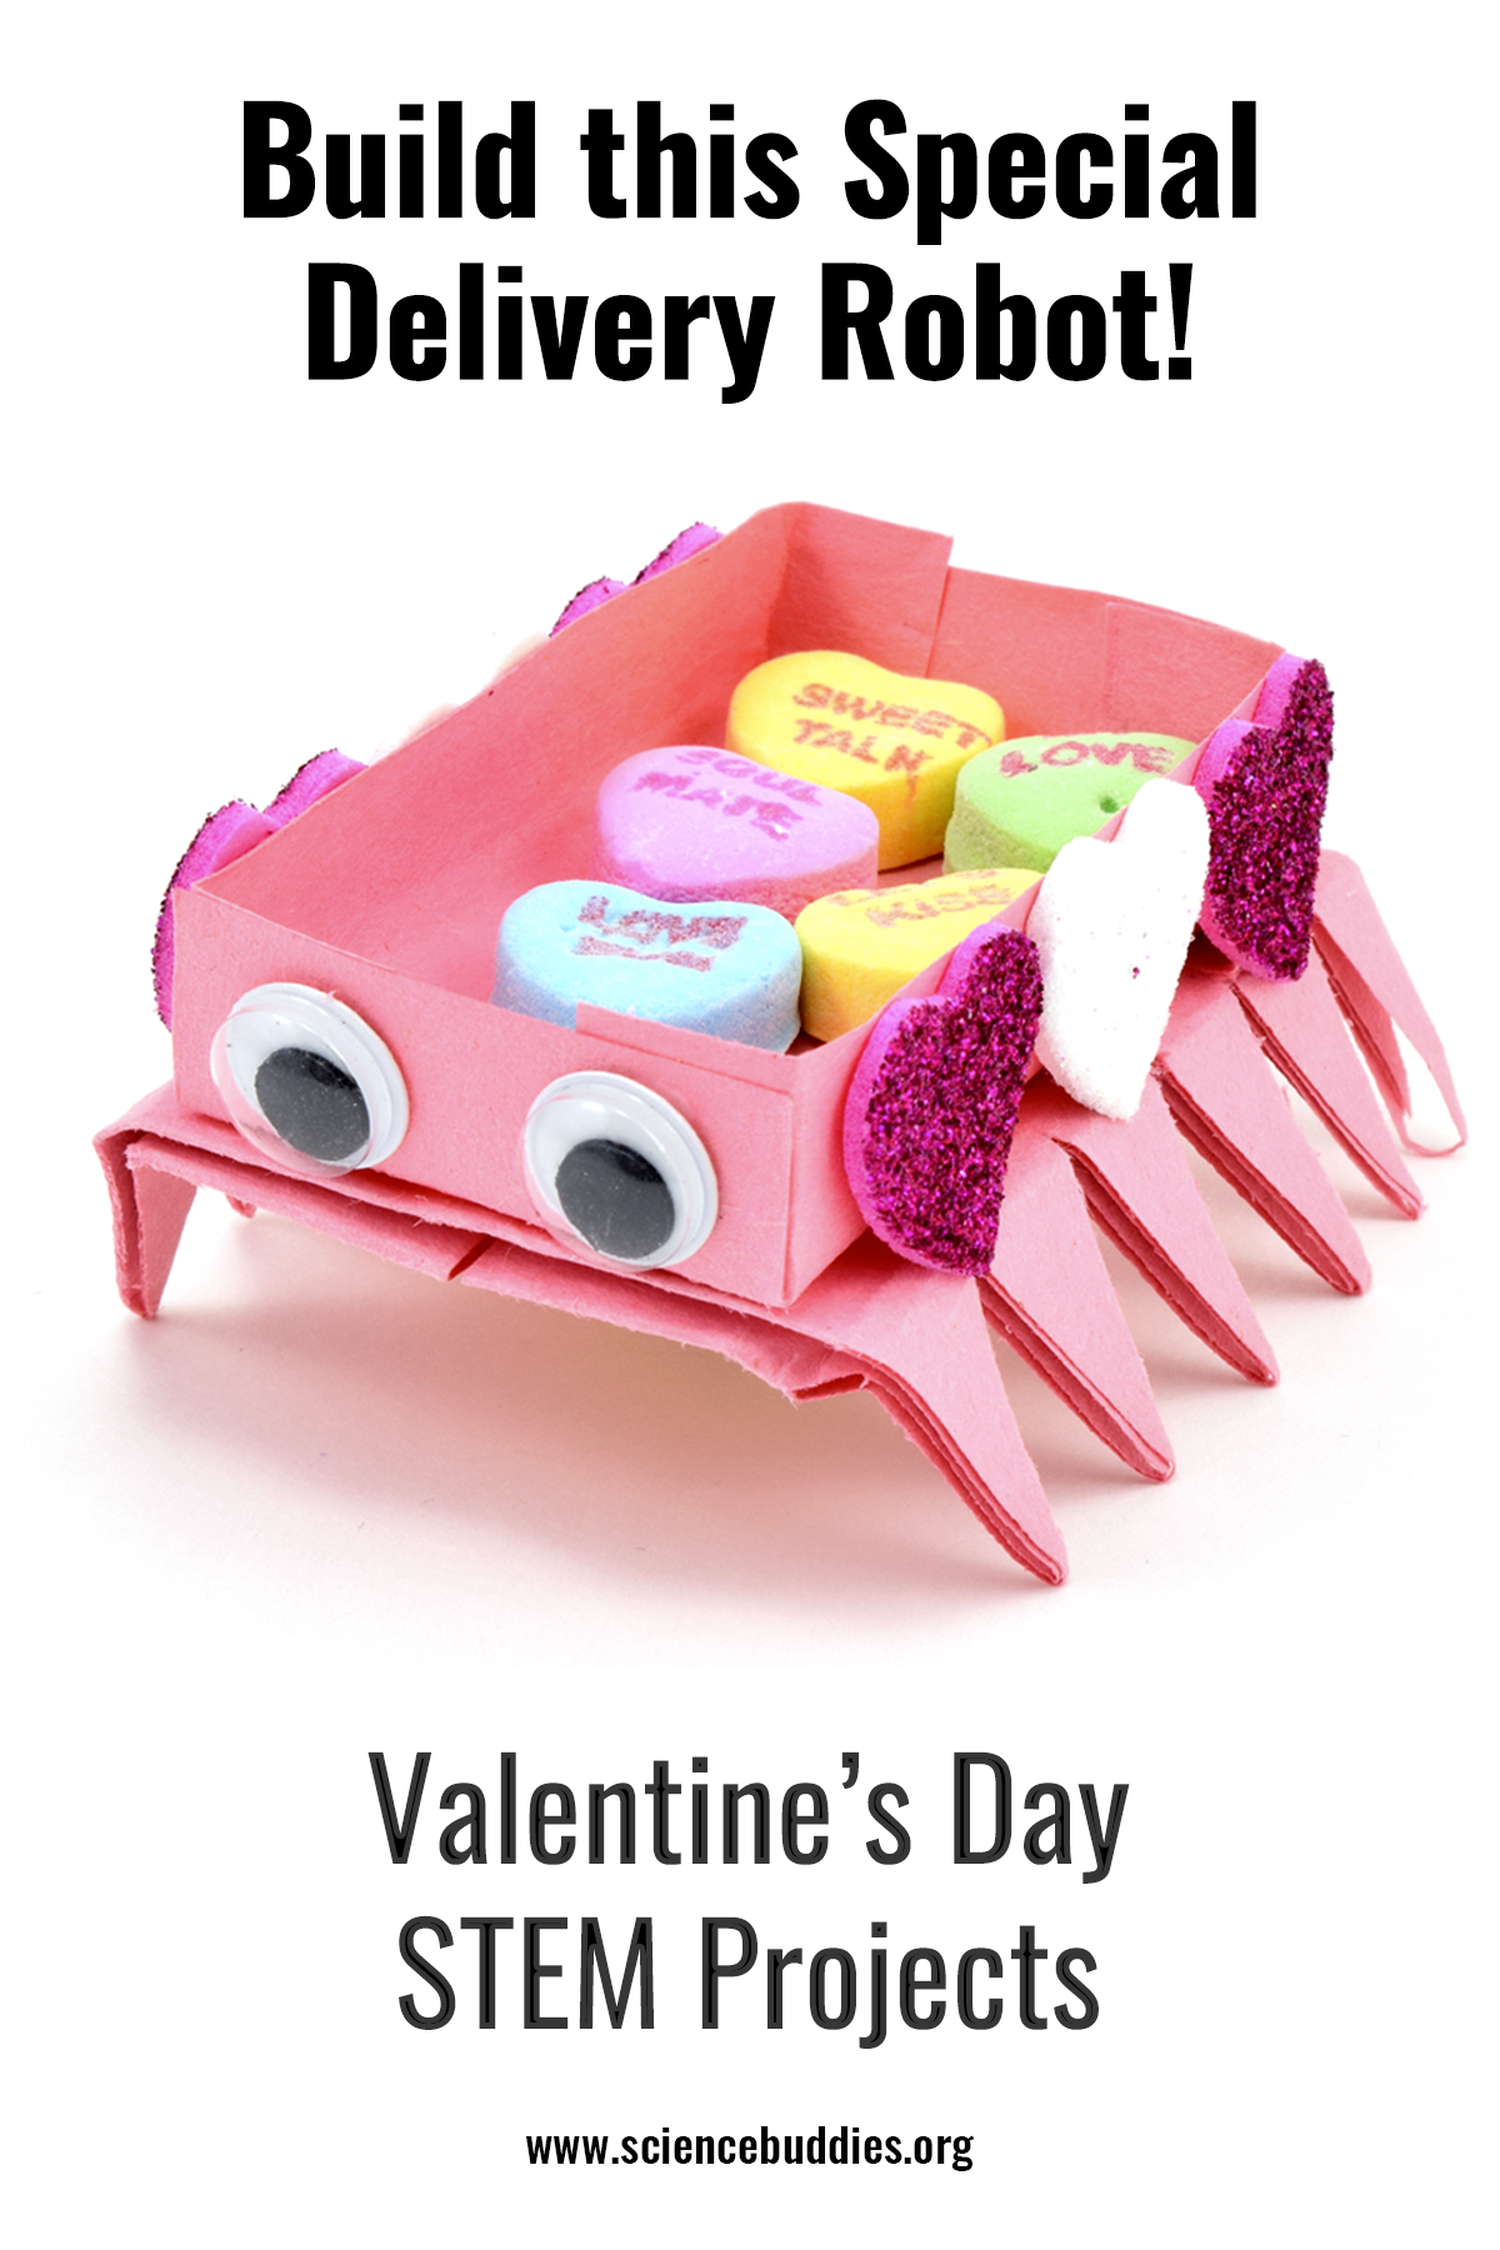 Valentine's Day STEM Experiments - simple vibrating robot with googly eyes and carrying heart shaped candies